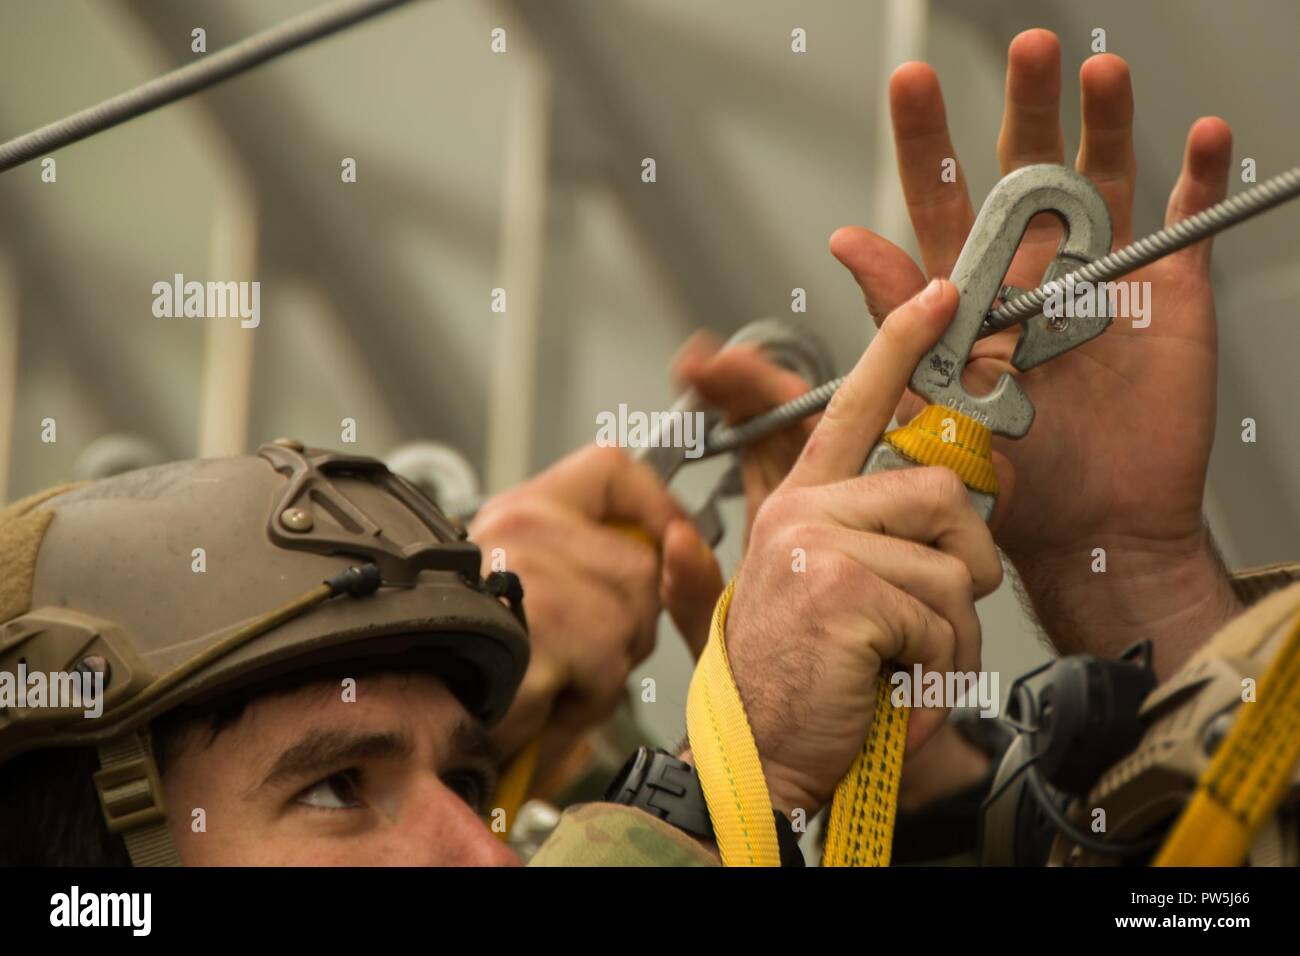 https://c8.alamy.com/comp/PW5J66/a-green-beret-assigned-to-1st-battalion-10th-special-forces-group-airborne-attaches-the-snap-hook-of-his-universal-static-line-to-the-anchor-line-cable-of-a-c-130-hercules-mock-up-during-pre-jump-training-near-stuttgart-germany-sept-20th-2017-the-training-is-a-required-part-of-the-airborne-timeline-and-ensures-that-all-jumpers-have-a-full-understanding-of-the-procedures-while-jumping-from-an-aircraft-special-operations-soldiers-must-jump-at-least-four-times-a-year-to-maintain-proficiency-in-airborne-operations-PW5J66.jpg